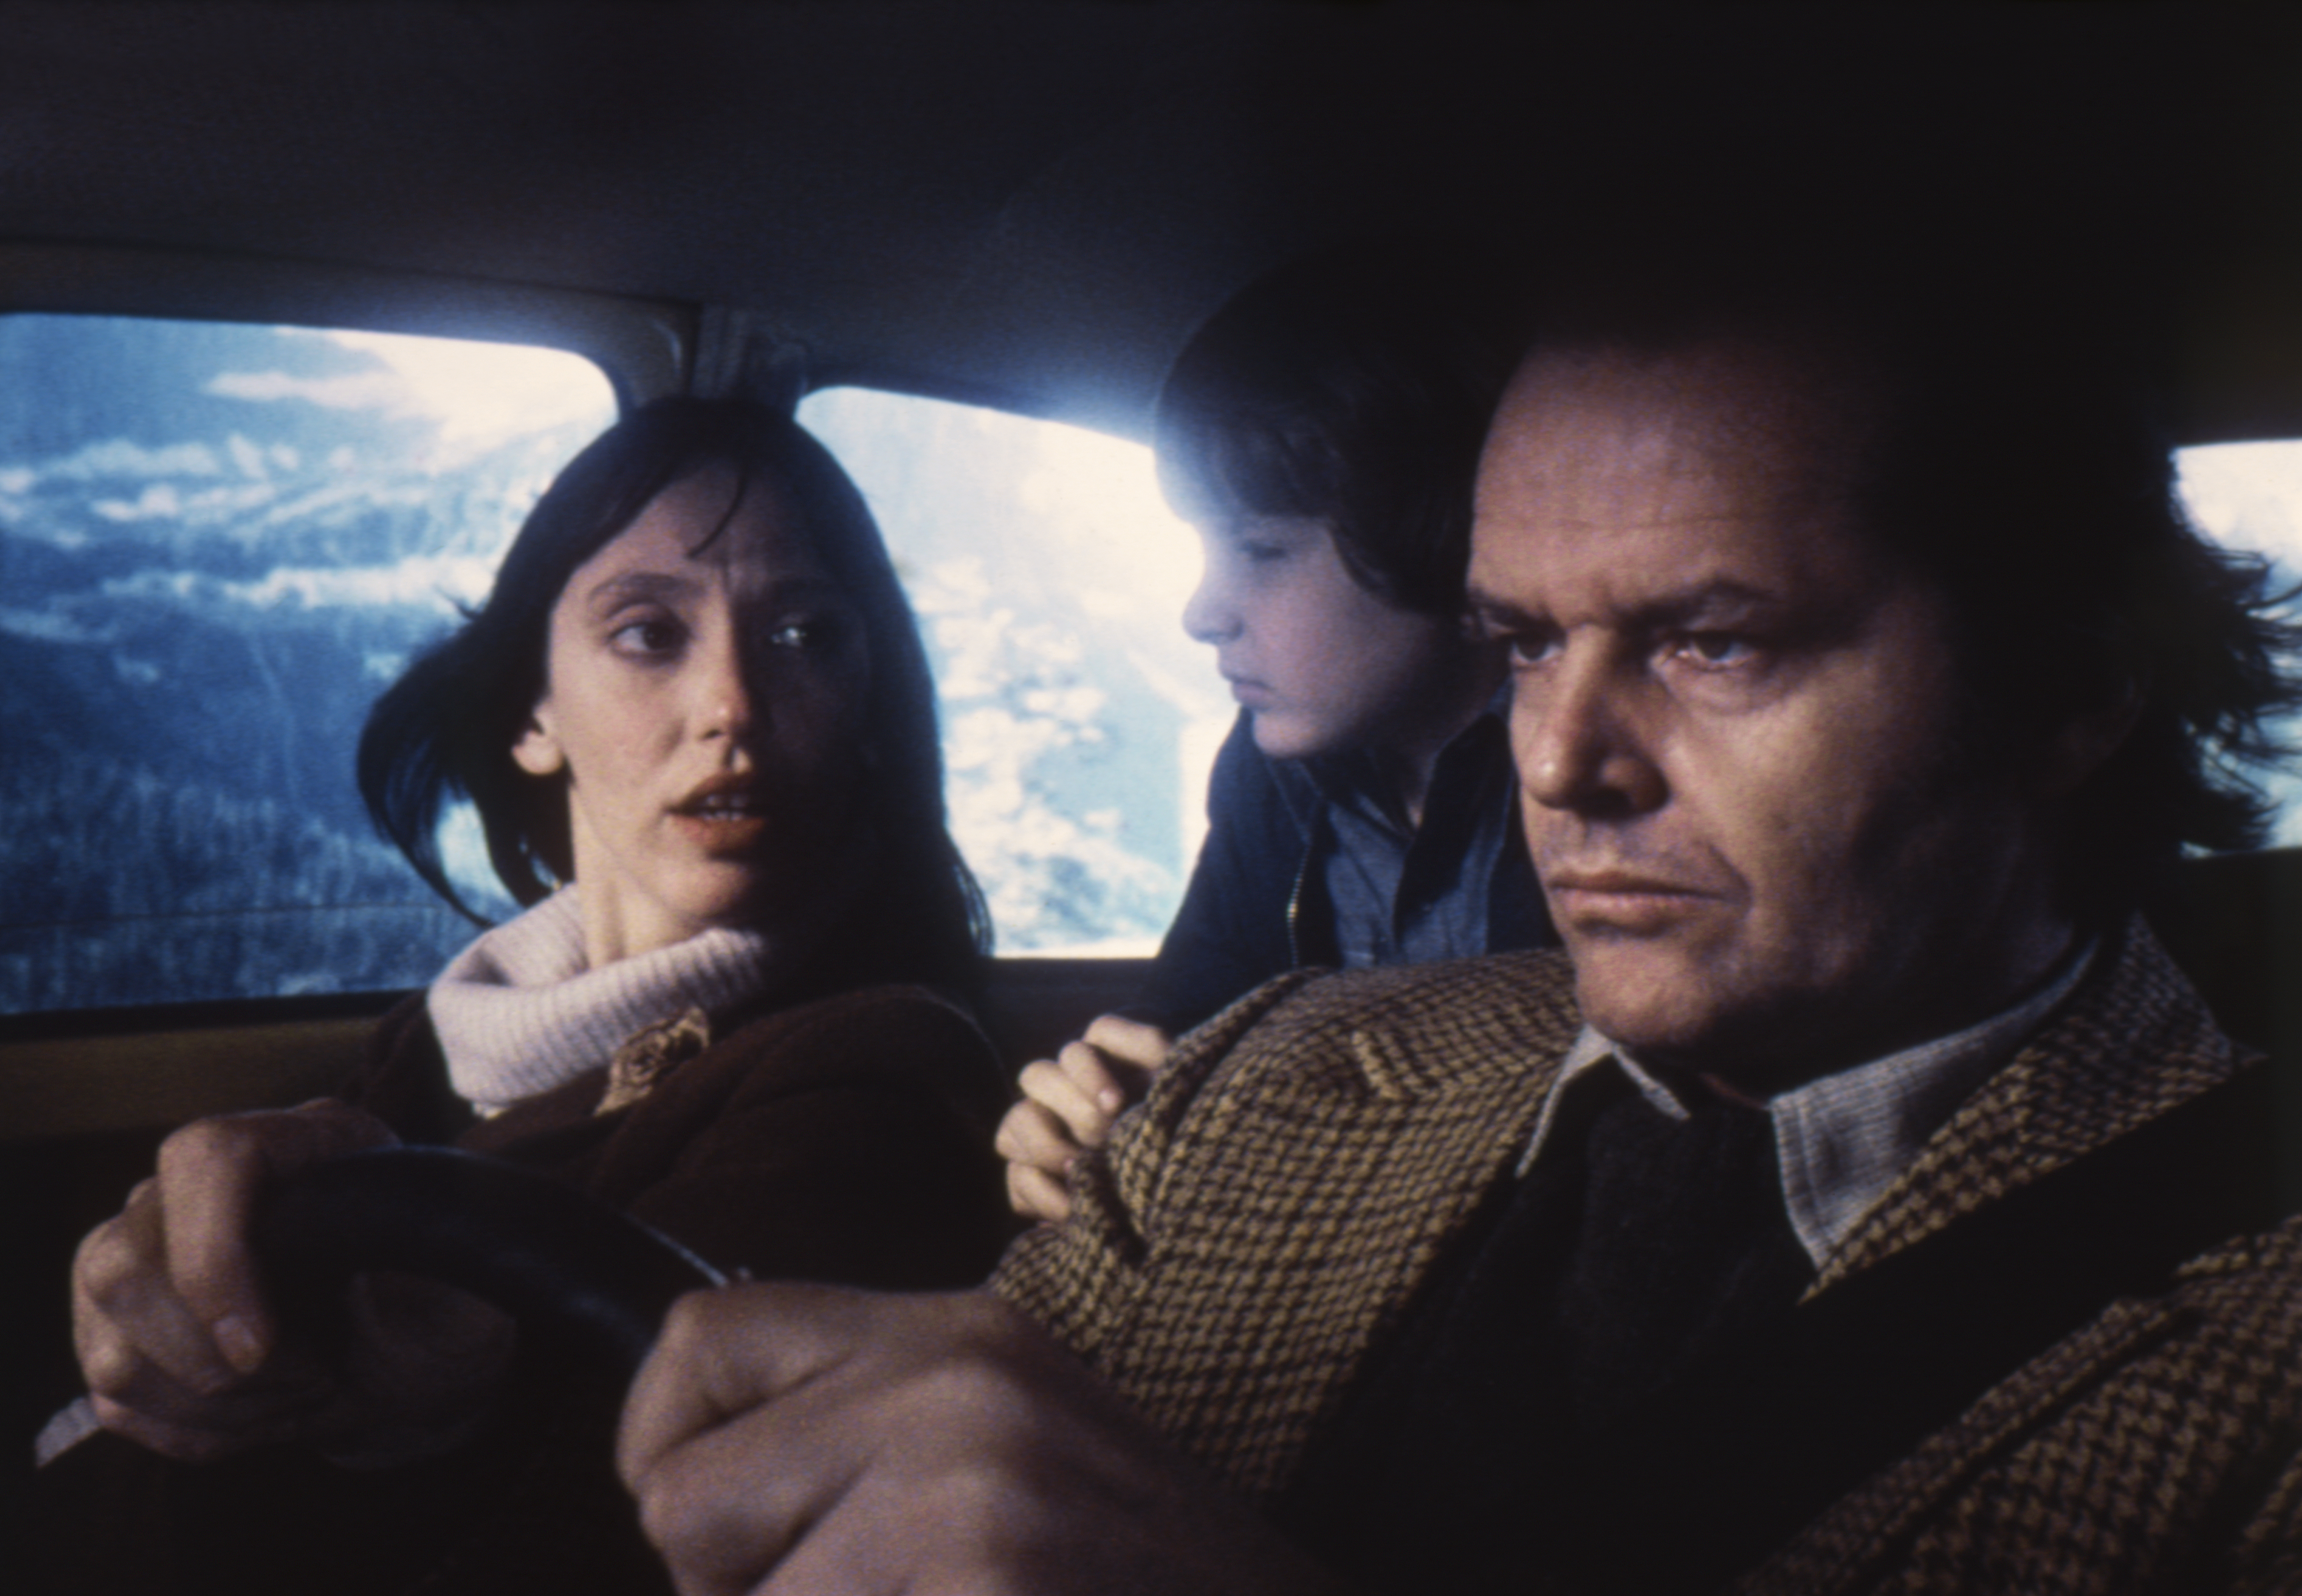 American actors Jack Nicholson, Danny Lloyd, and Shelley Duvall on the set of "The Shining," based on the novel by Stephen King and directed by Stanley Kubrick. | Source: Getty Images